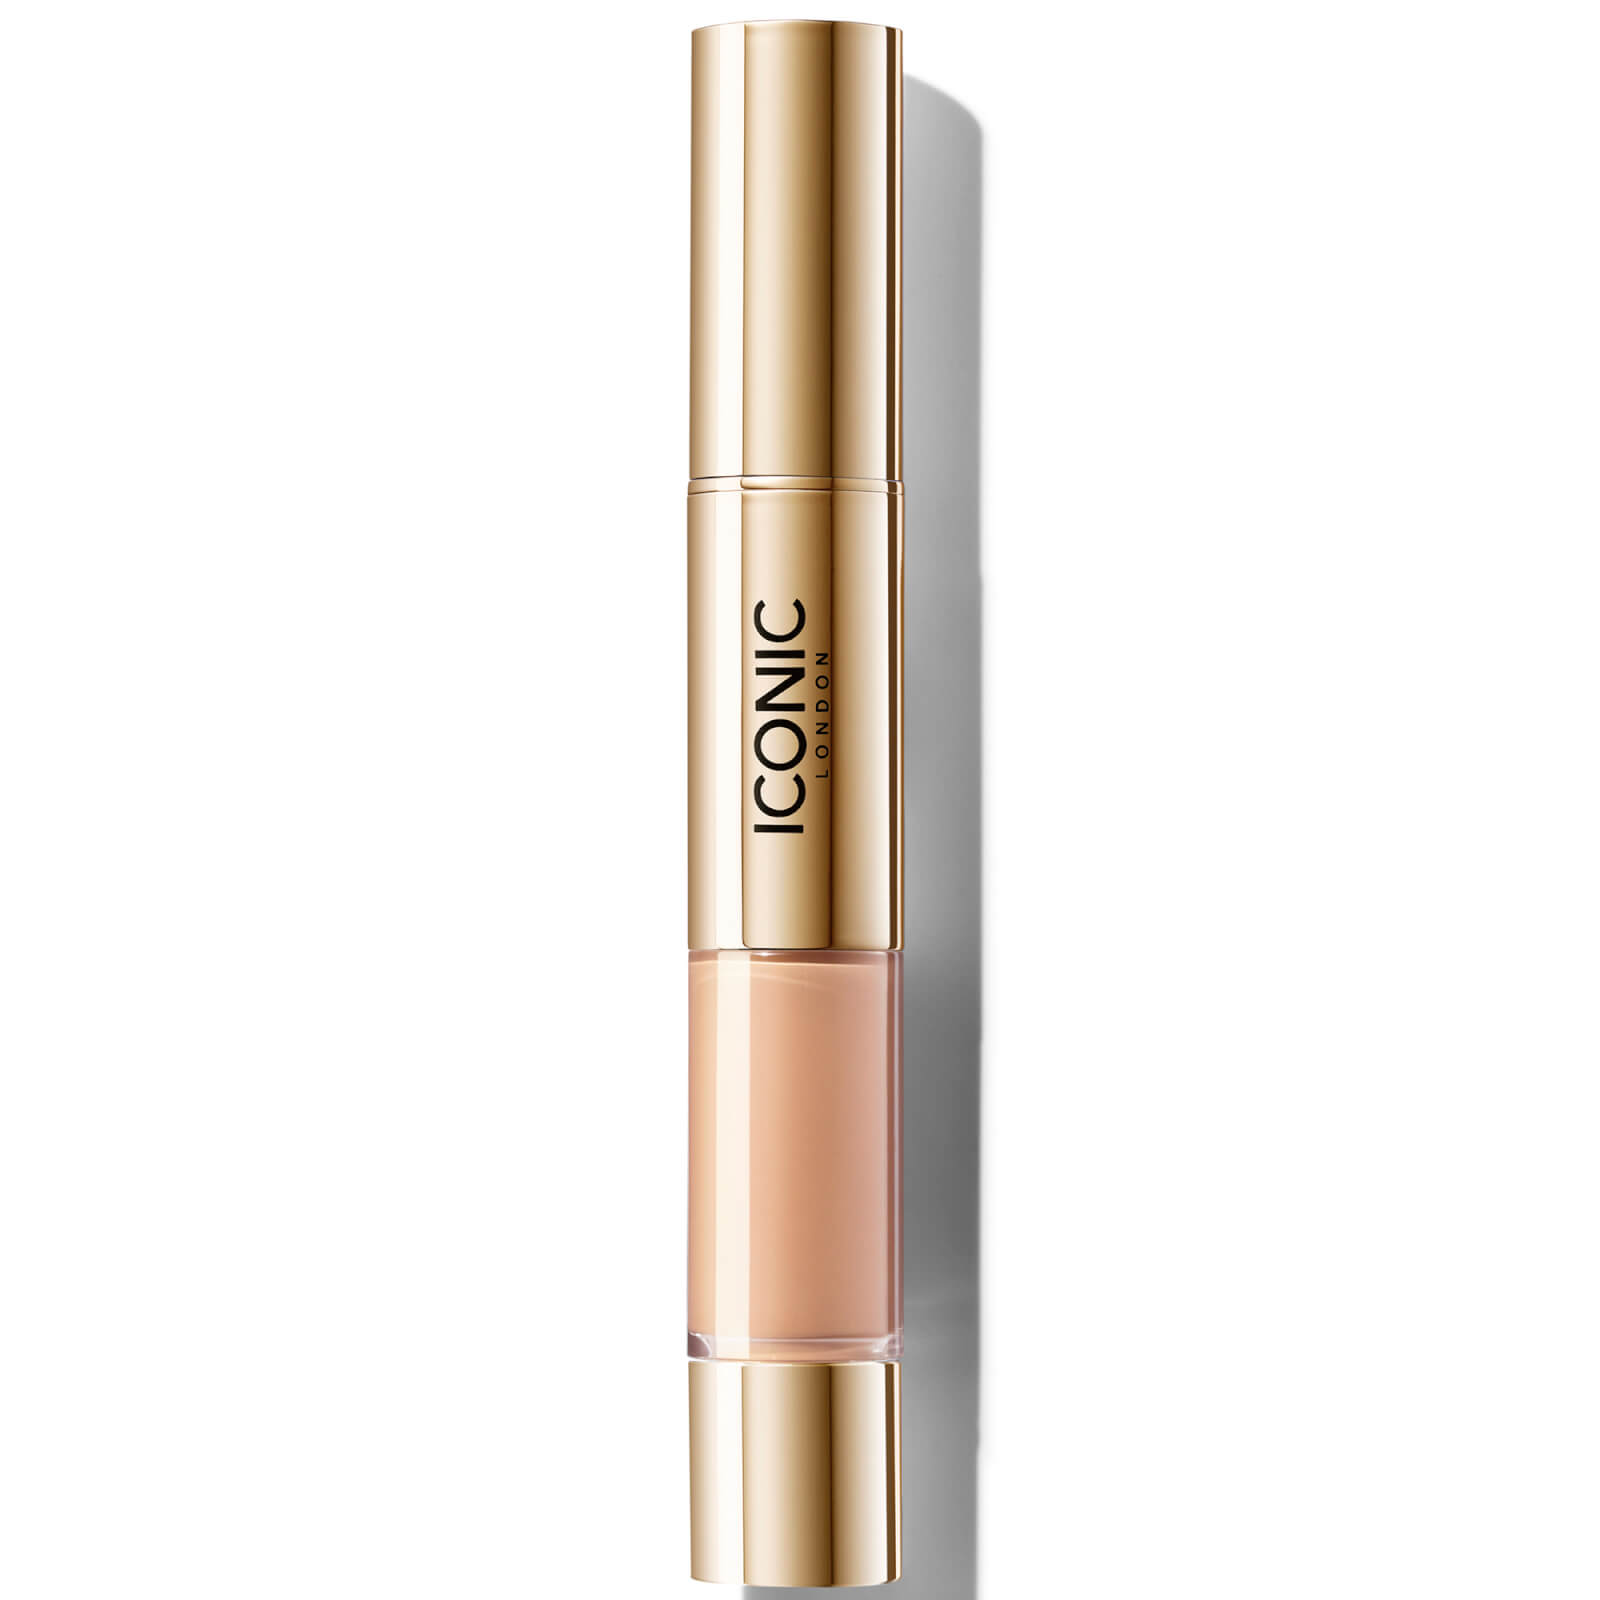 ICONIC London Radiant Concealer and Brightening Duo - Cool Light von ICONIC London